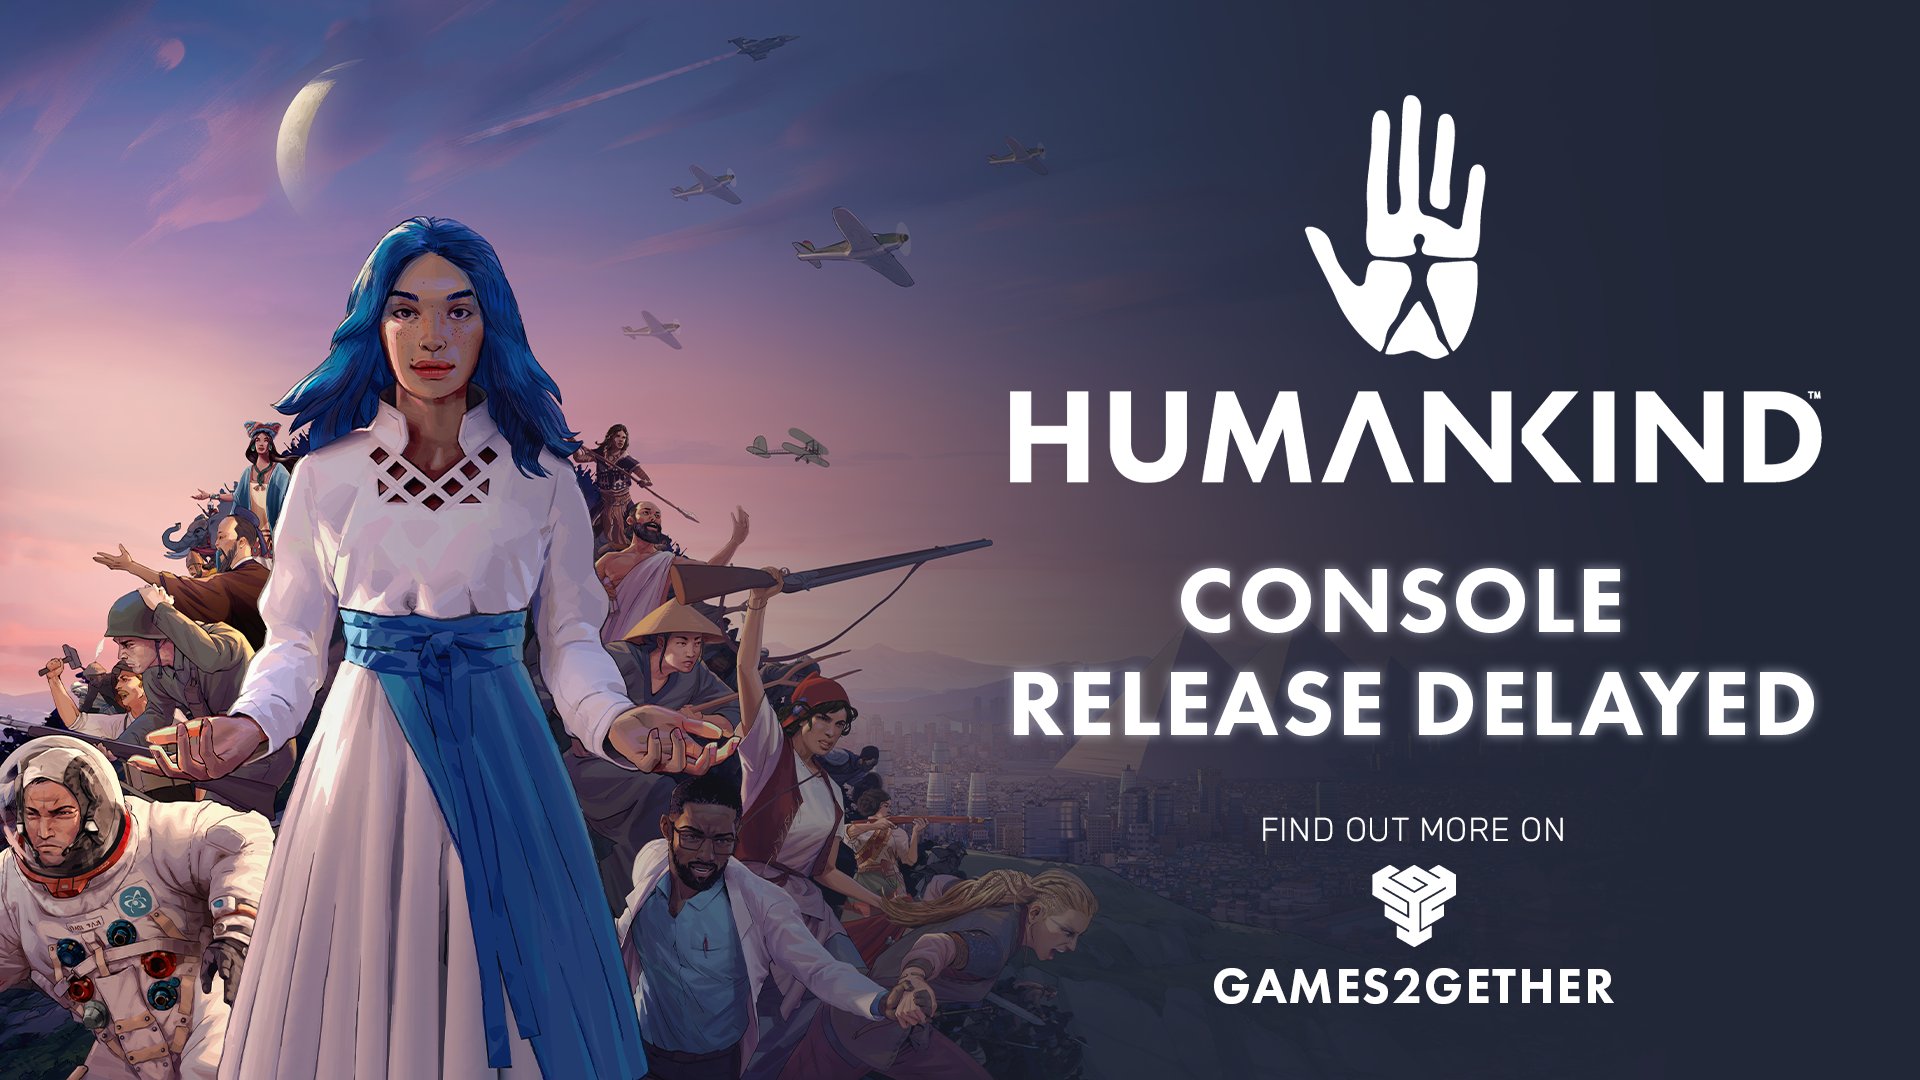 Humankind: Release for consoles postponed indefinitely - News